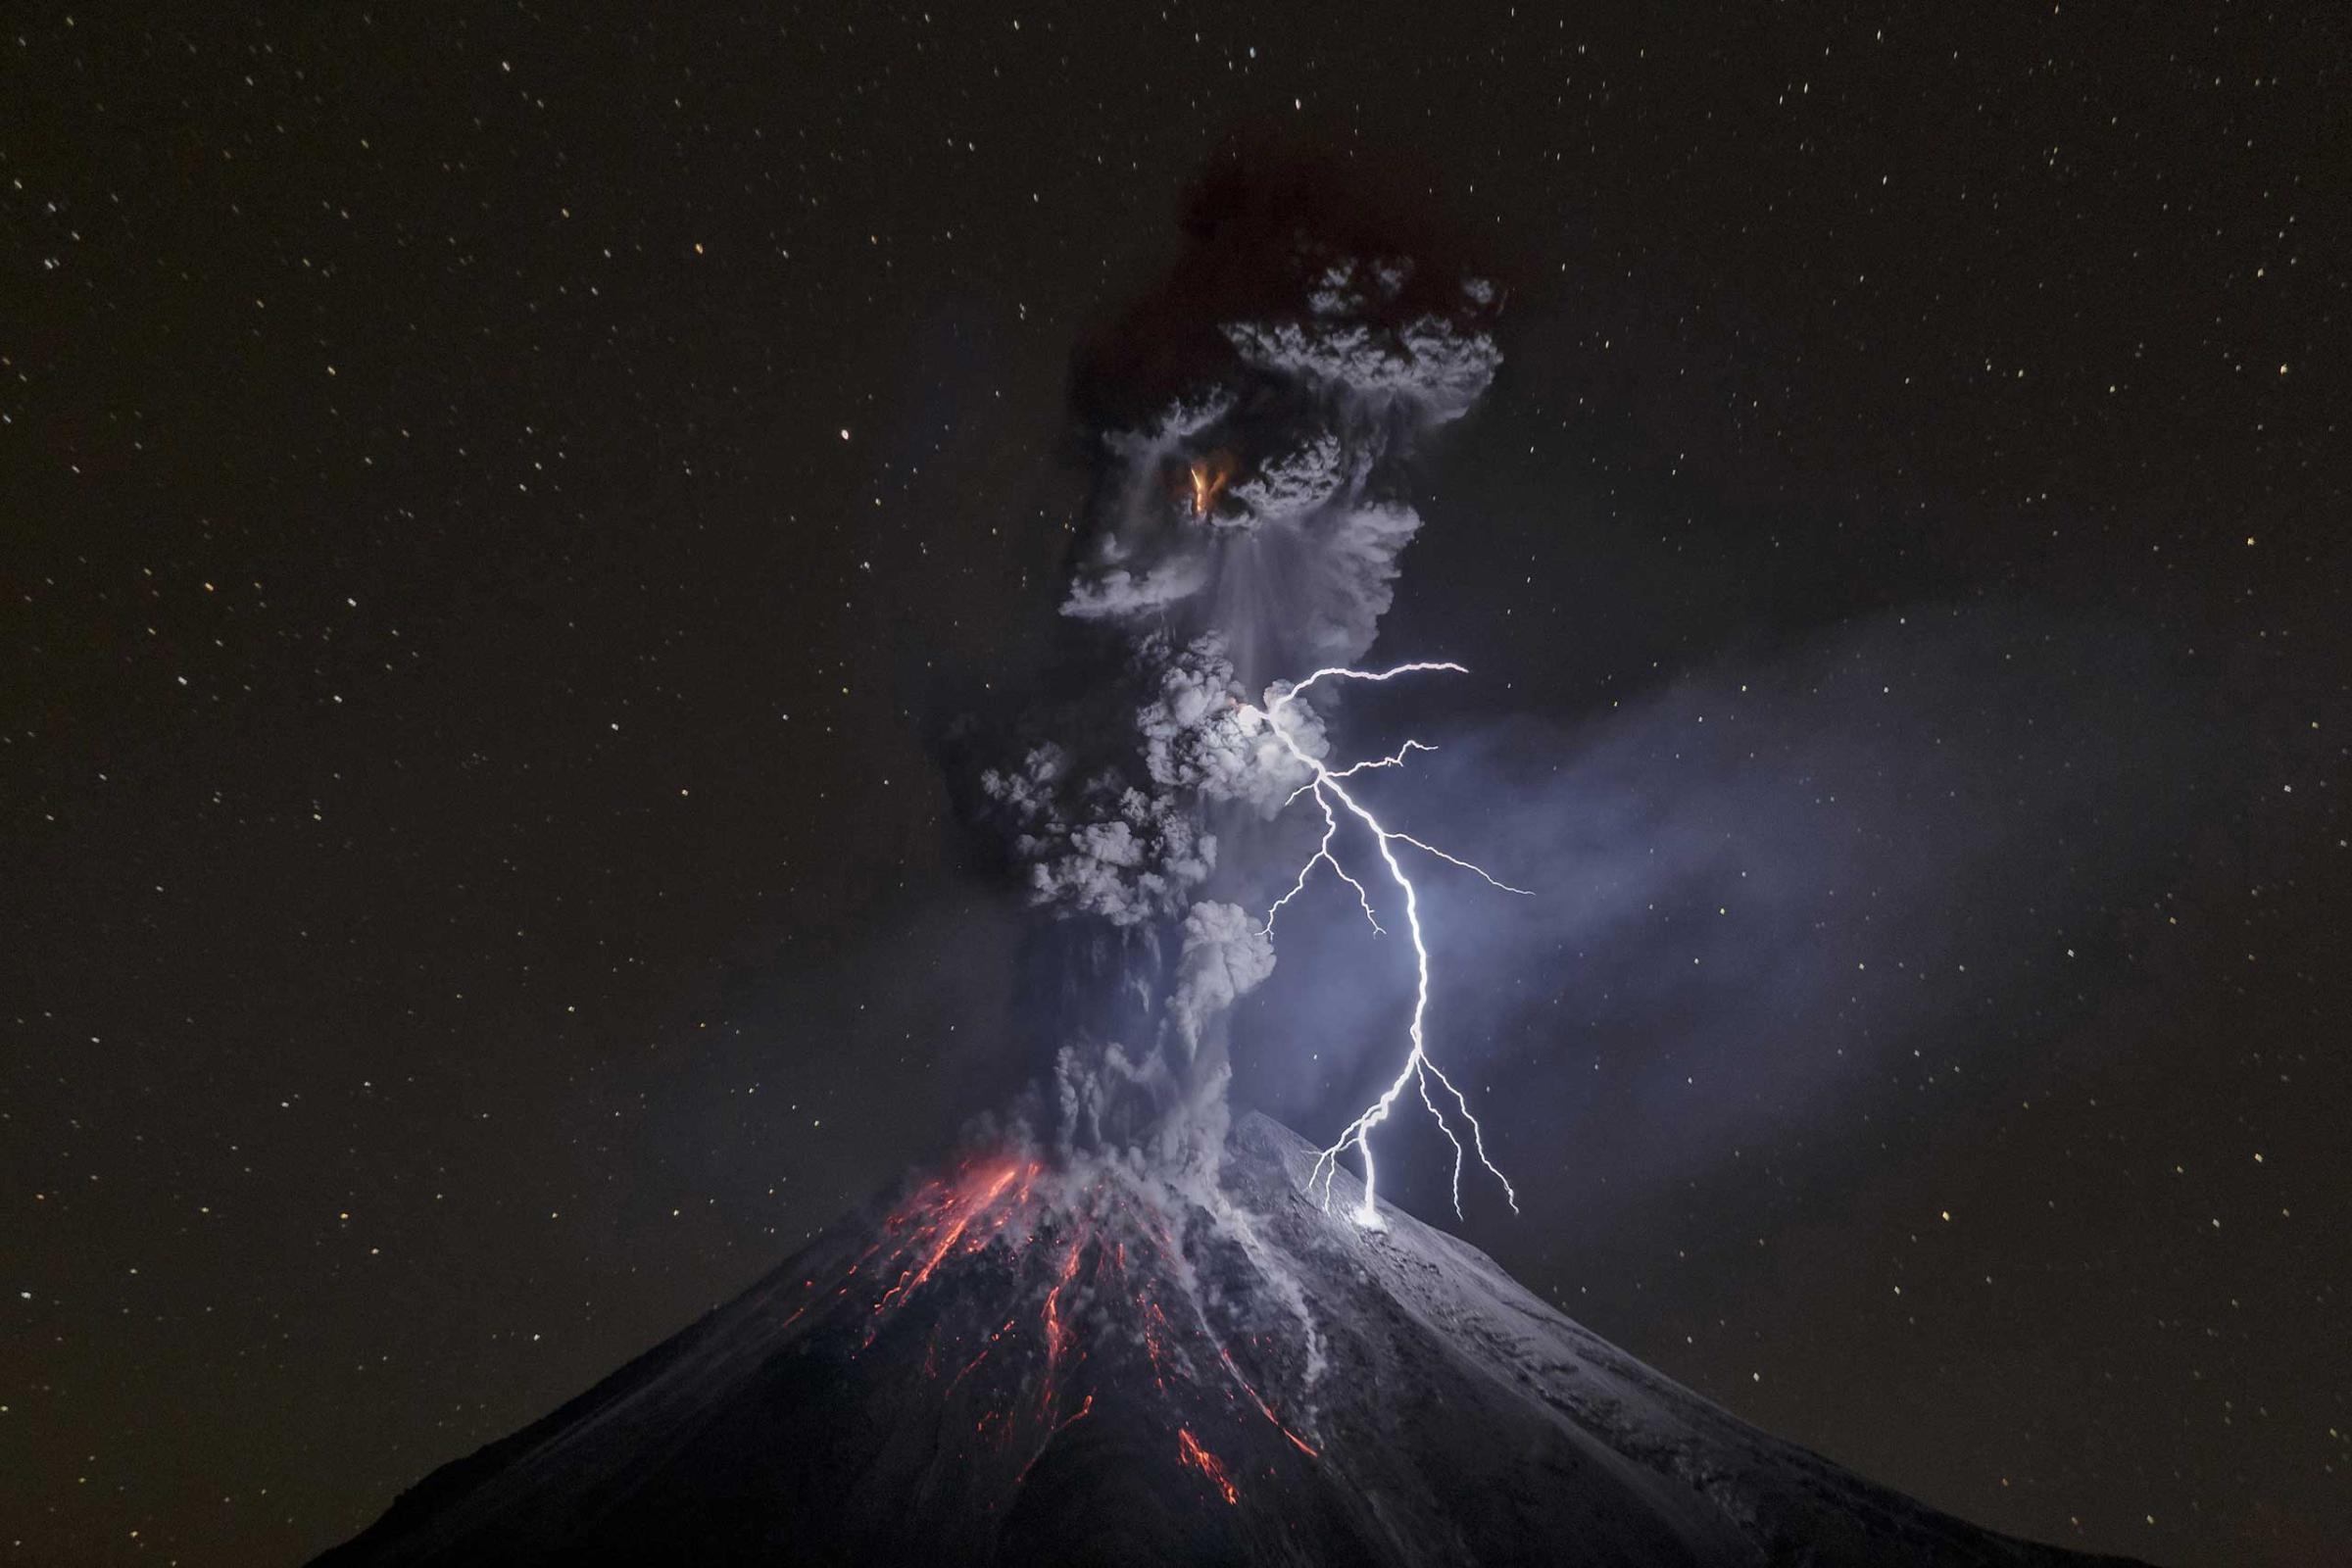 Nature, 3rd prize singles. Colima Volcano in Mexico shows a powerful night explosion with lightning, ballistic projectiles and incandescent rockfalls; image taken in the Comala municipality in Colima, Mexico, Dec. 13, 2015.